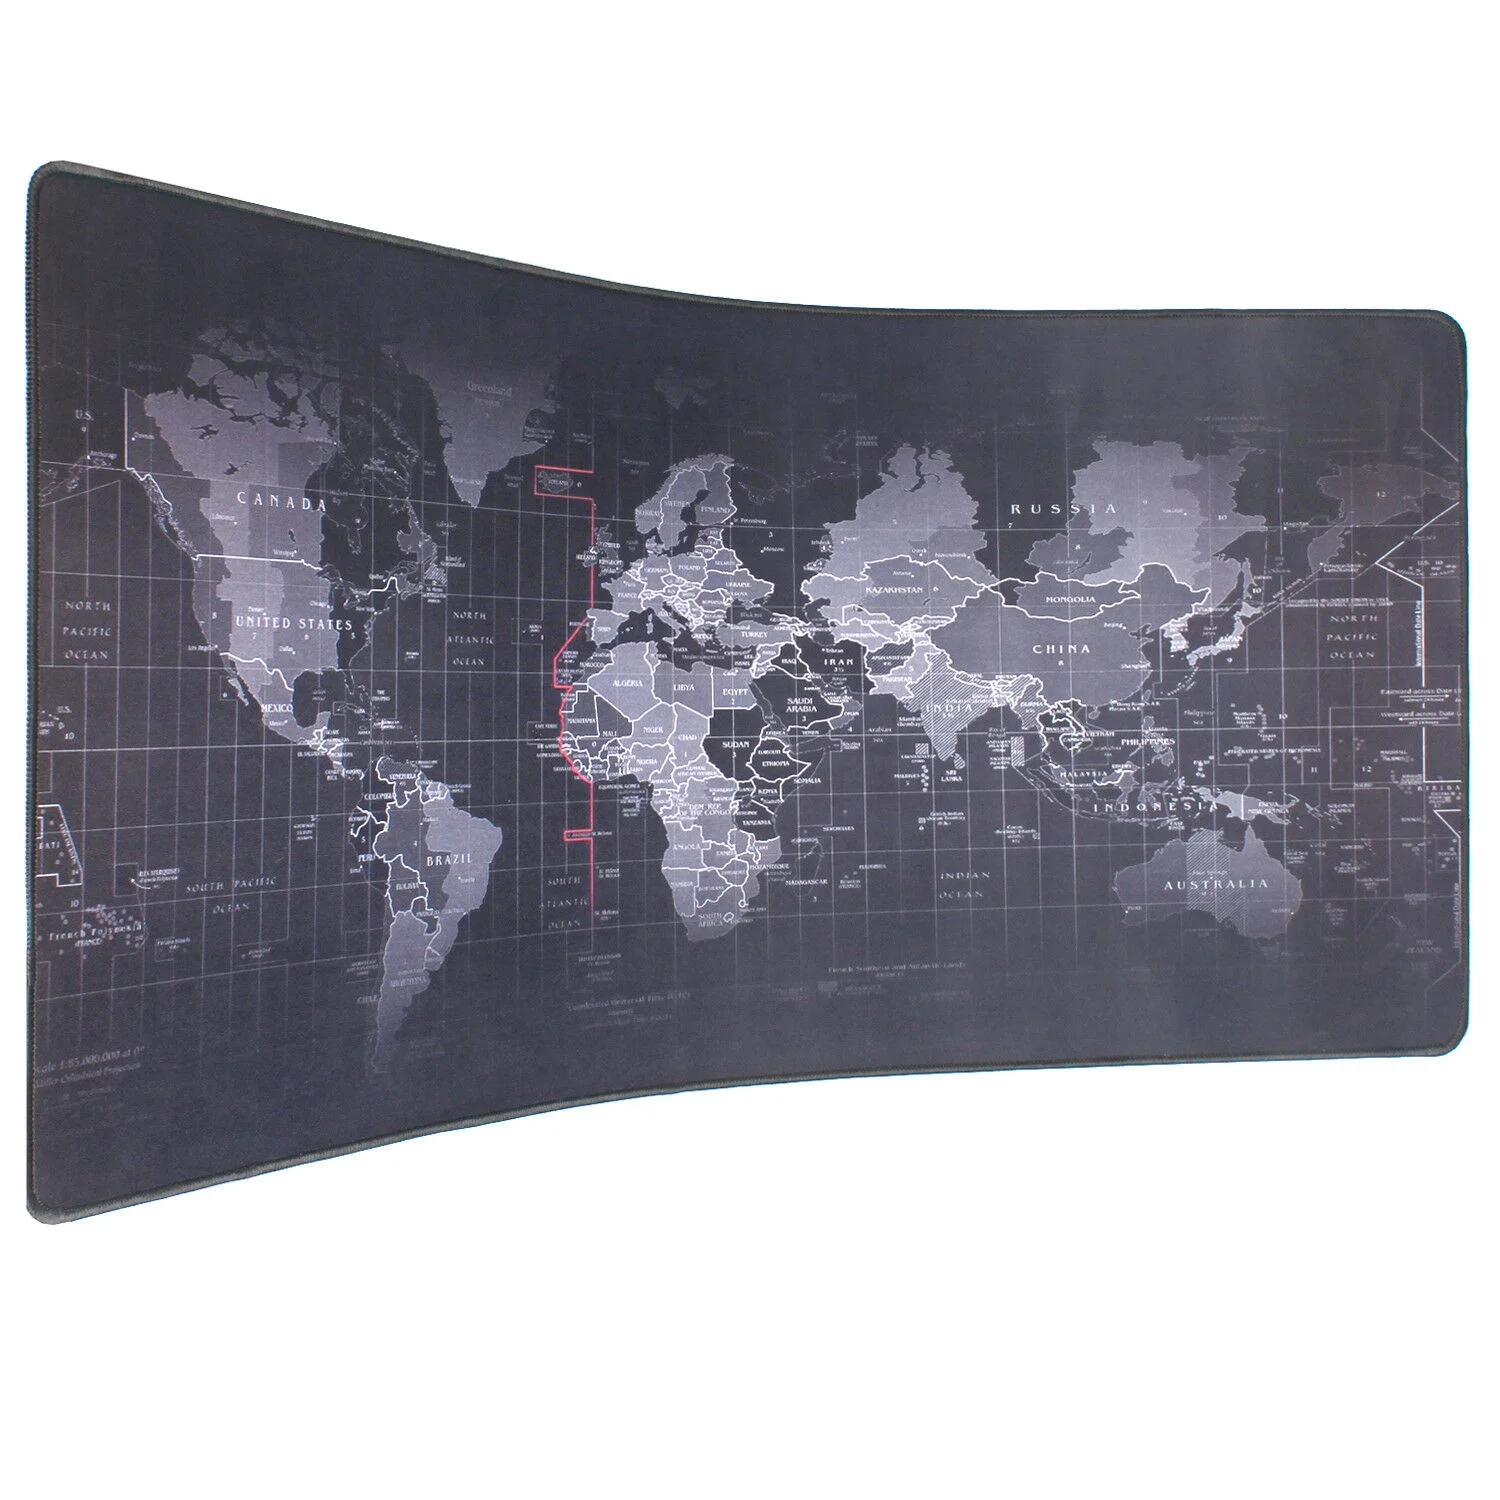 Custom Waterproof Non-slip Rubber Base Large Word Map Gaming Mouse Pad Desk Pad